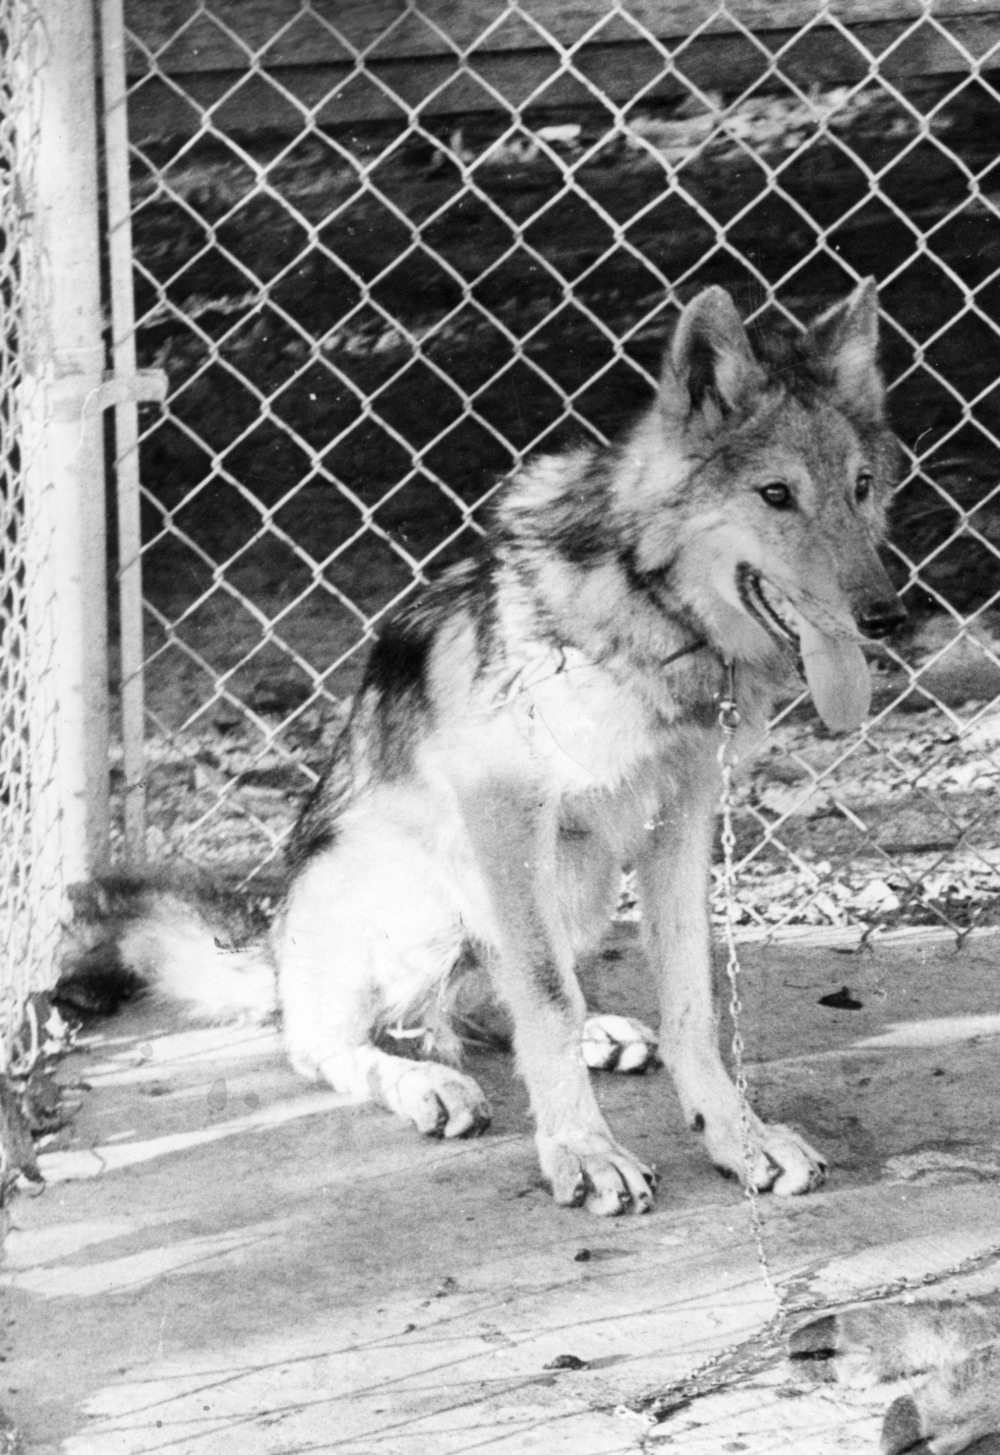 Lobo I, seen here, looked a lot closer to a wolf than his bulldog predecessors.